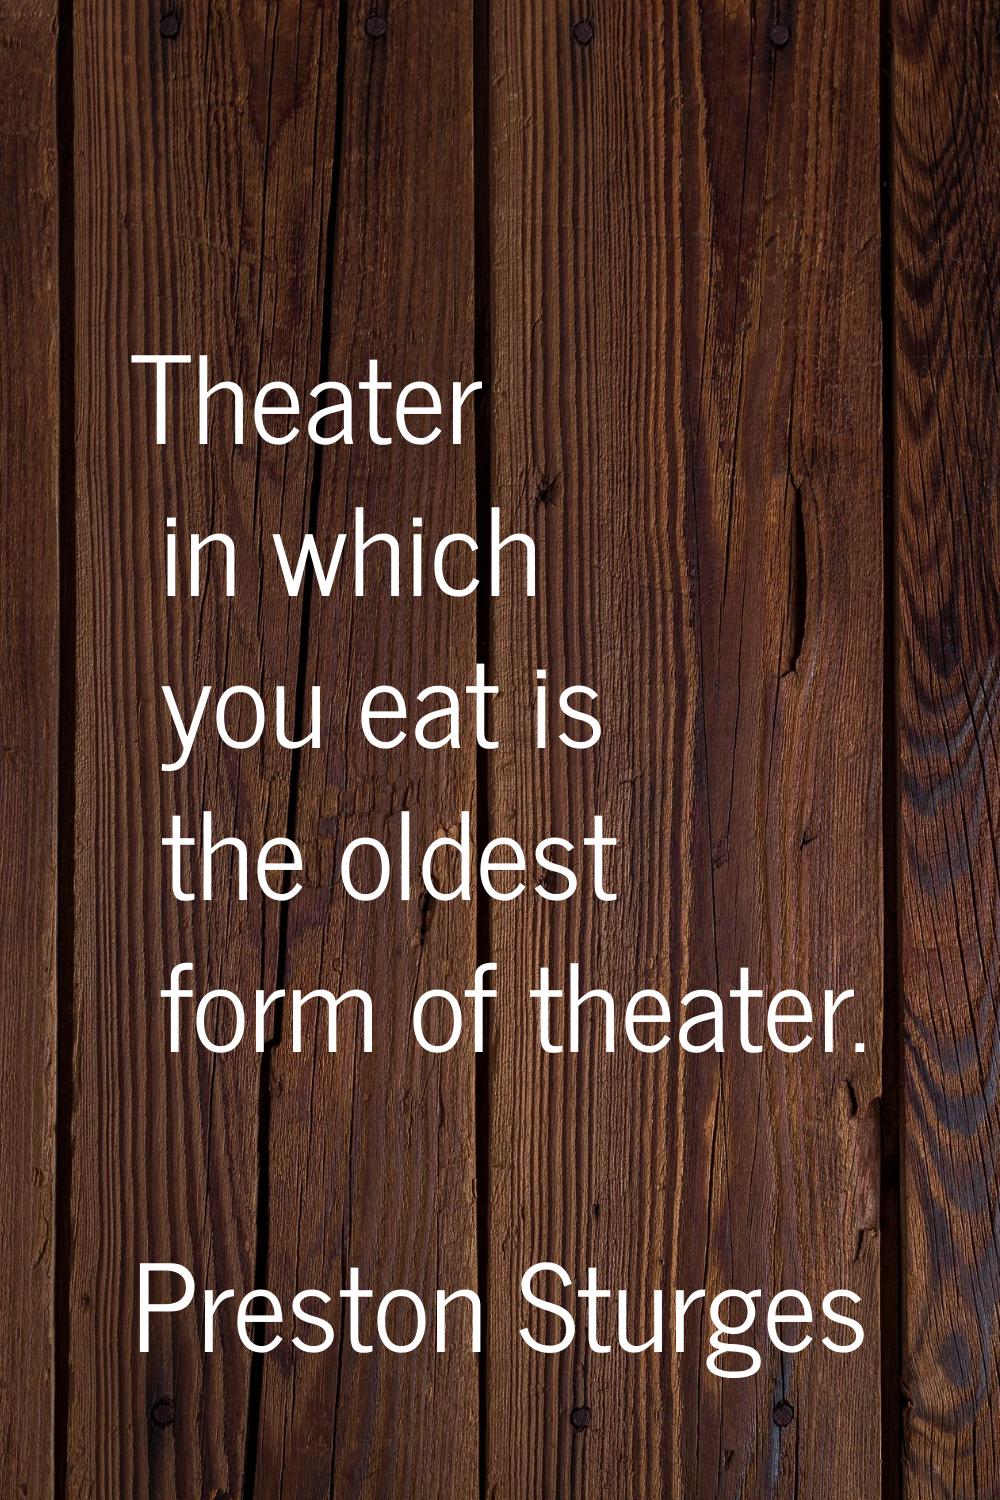 Theater in which you eat is the oldest form of theater.